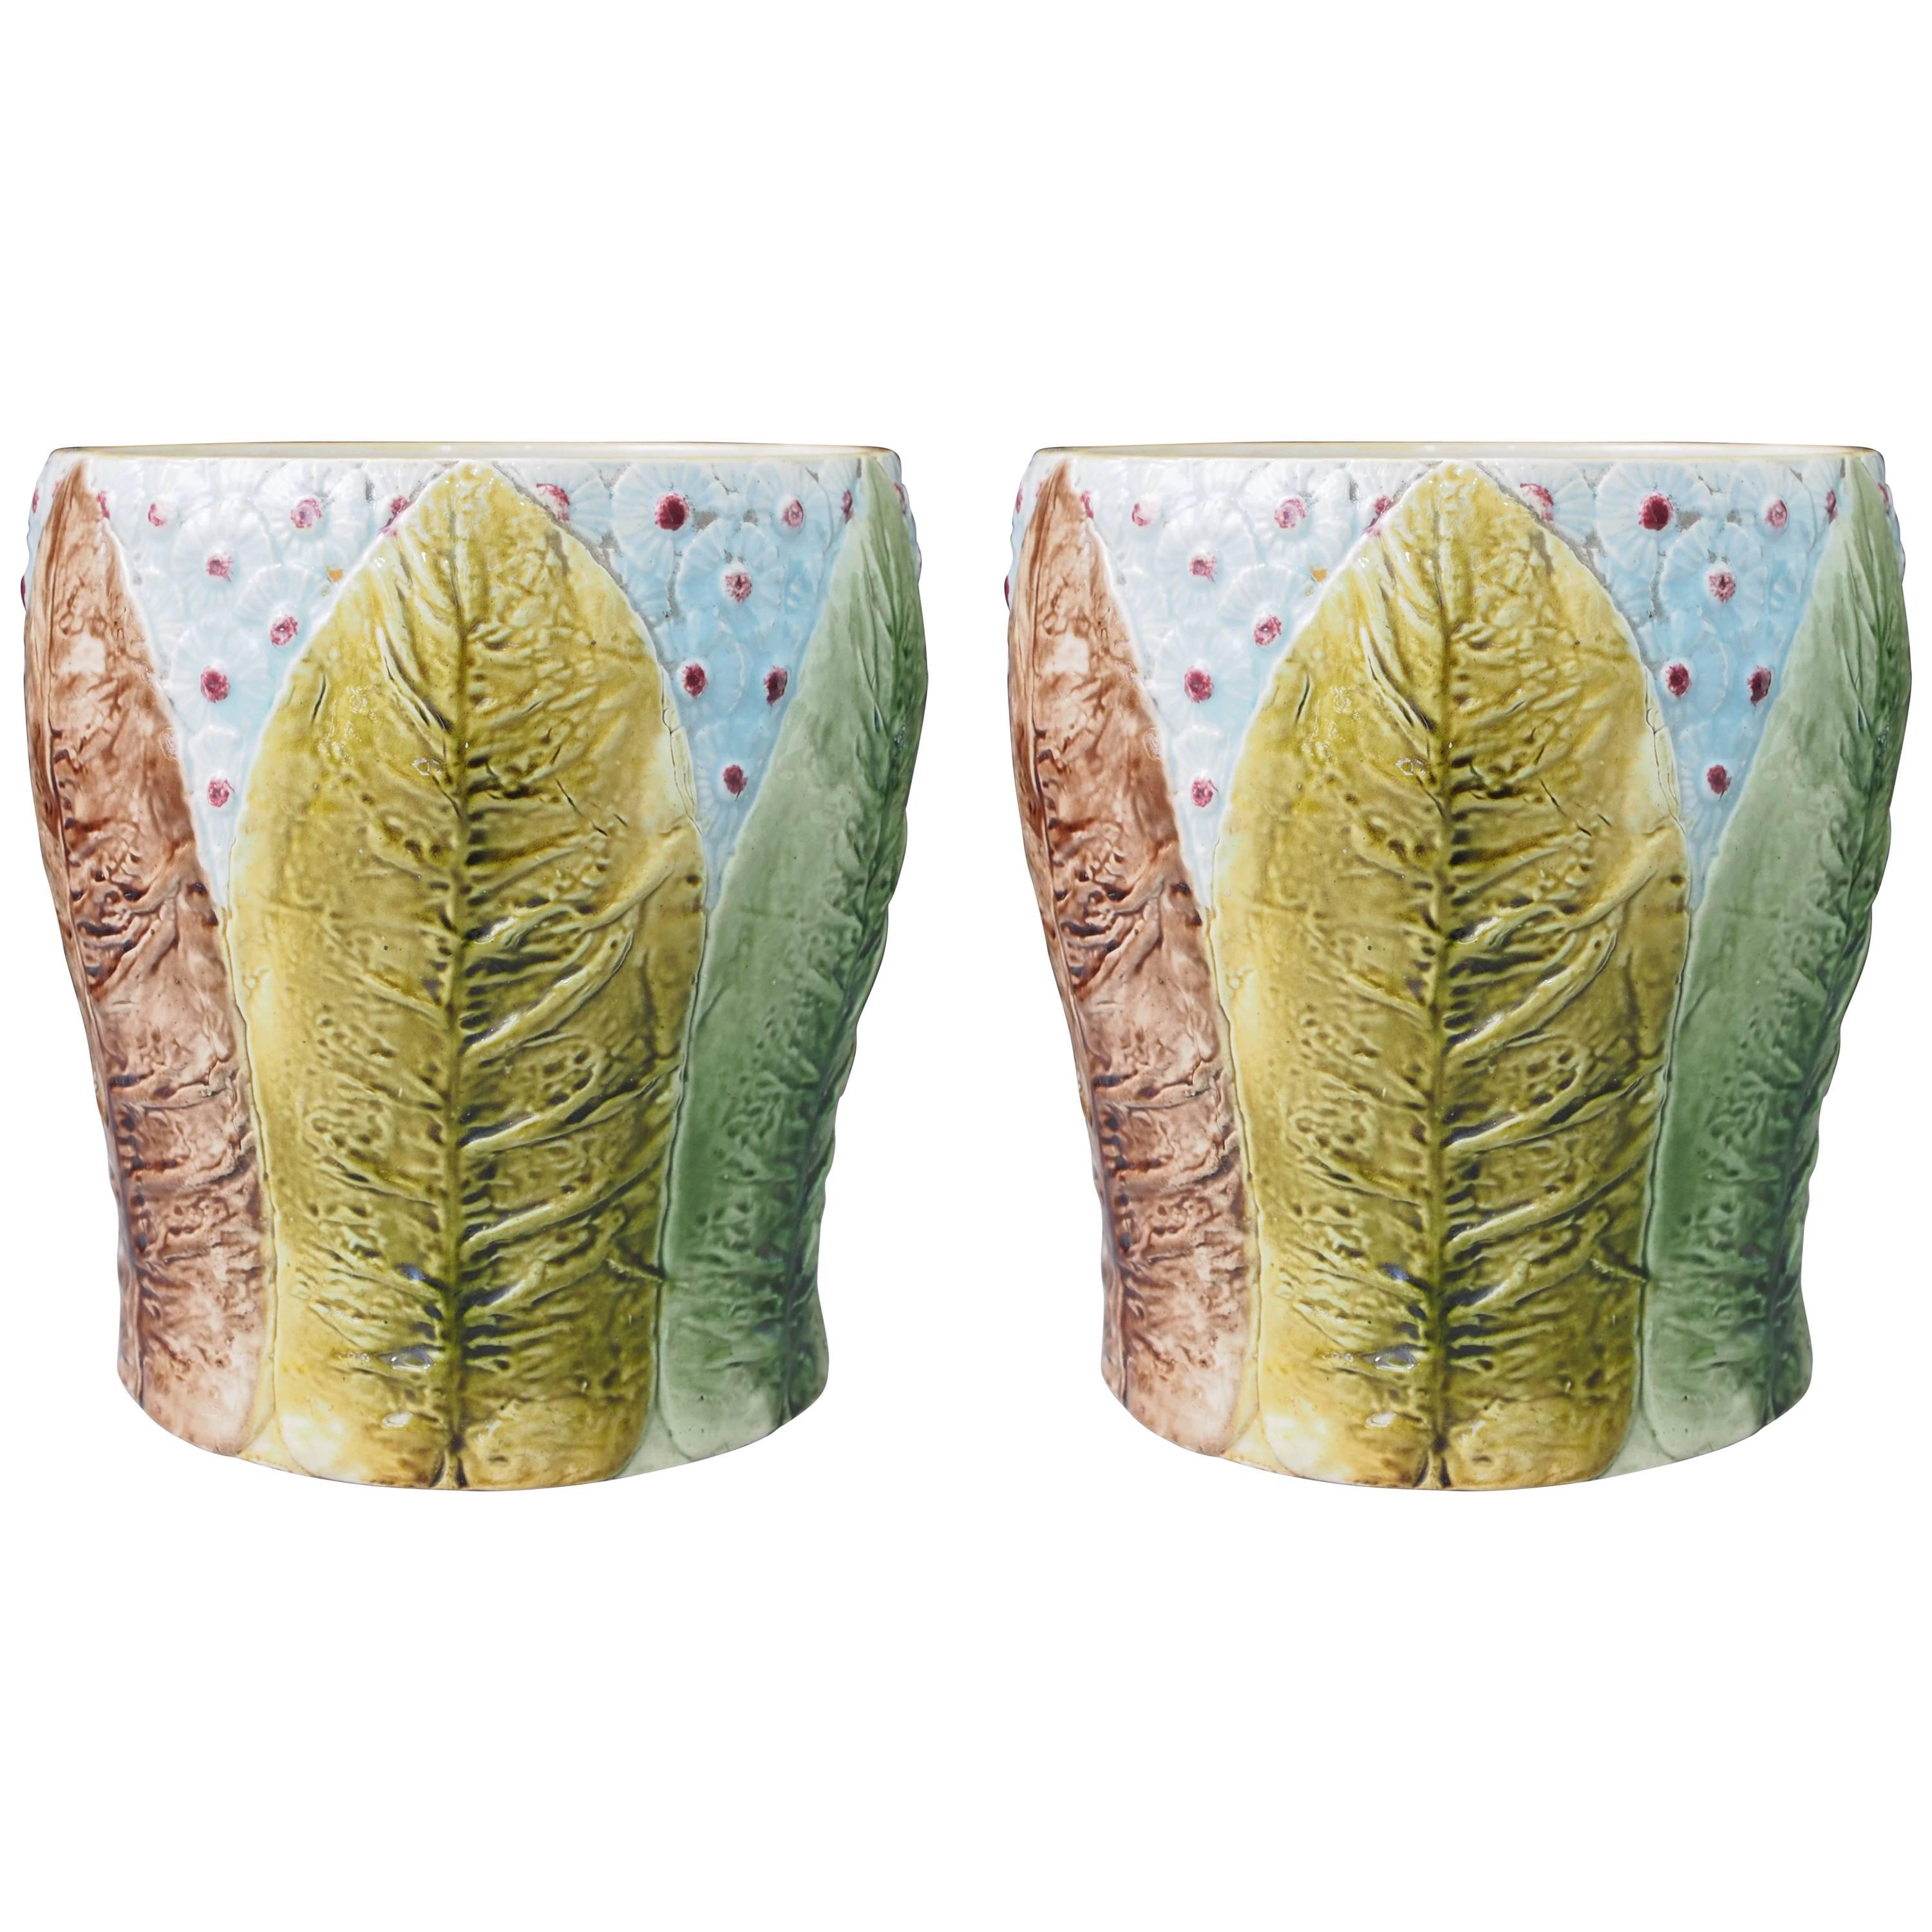 Pair of French Majolica Jardiniere in Tobacco Leaf Pattern